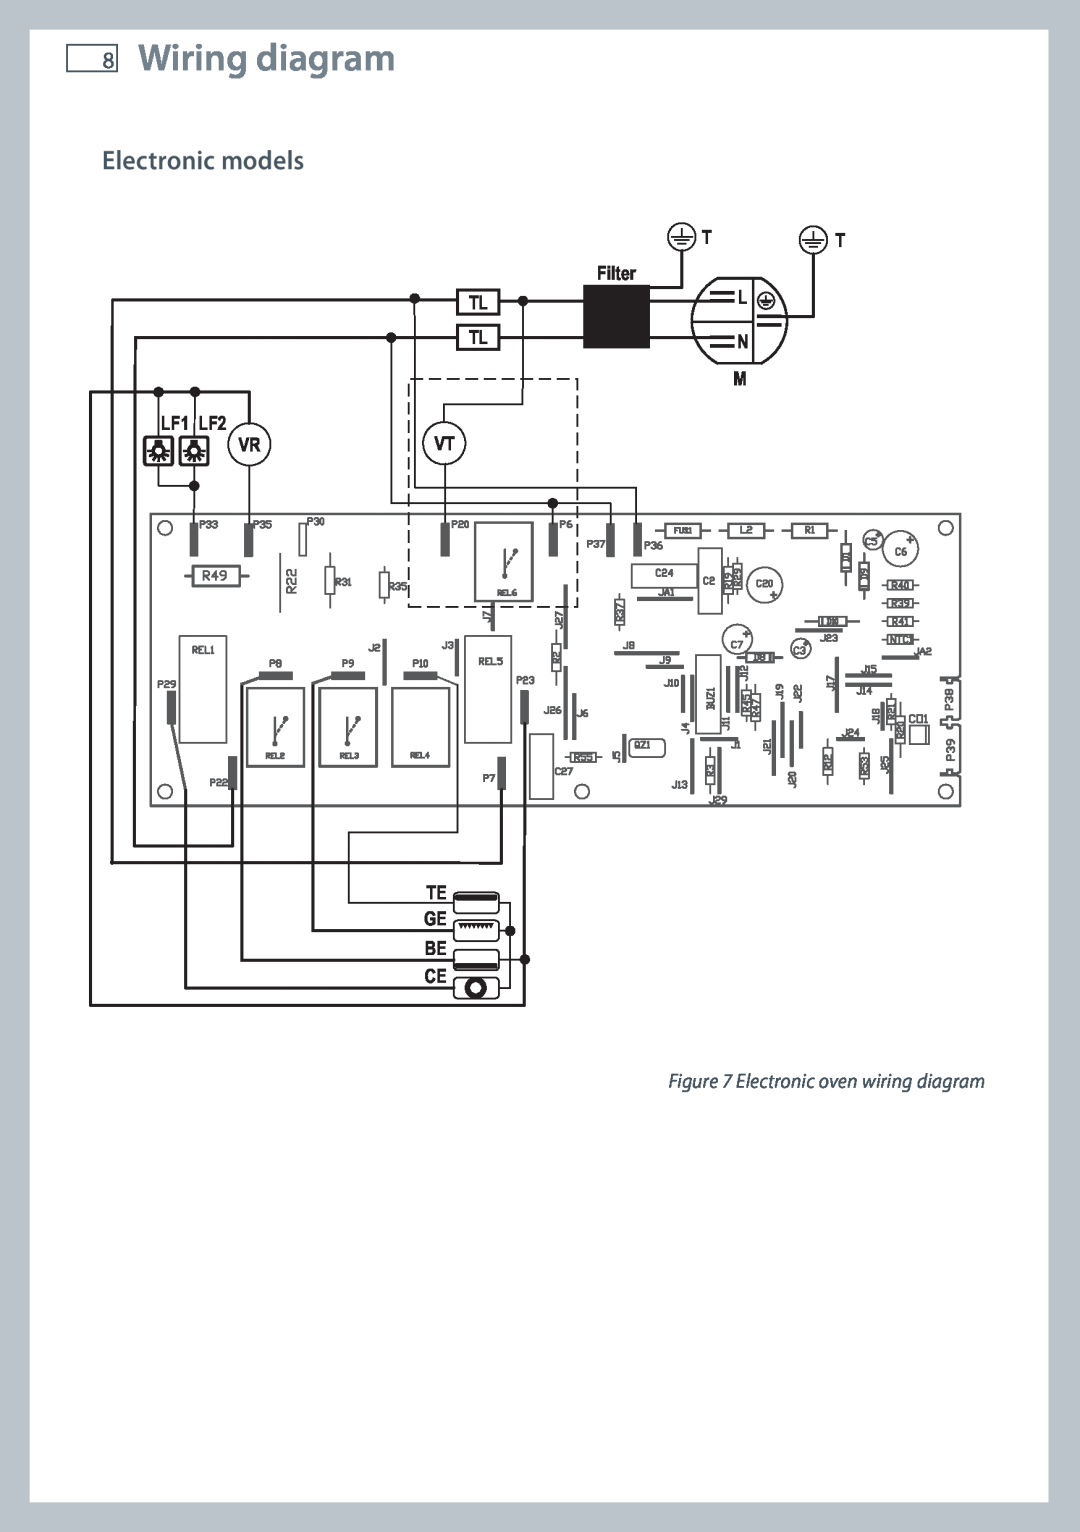 Fisher & Paykel OB60 Wiring diagram, Electronic models, Electronic oven wiring diagram, TL TL LF1 LF2 VRVT TE GE BE CE 